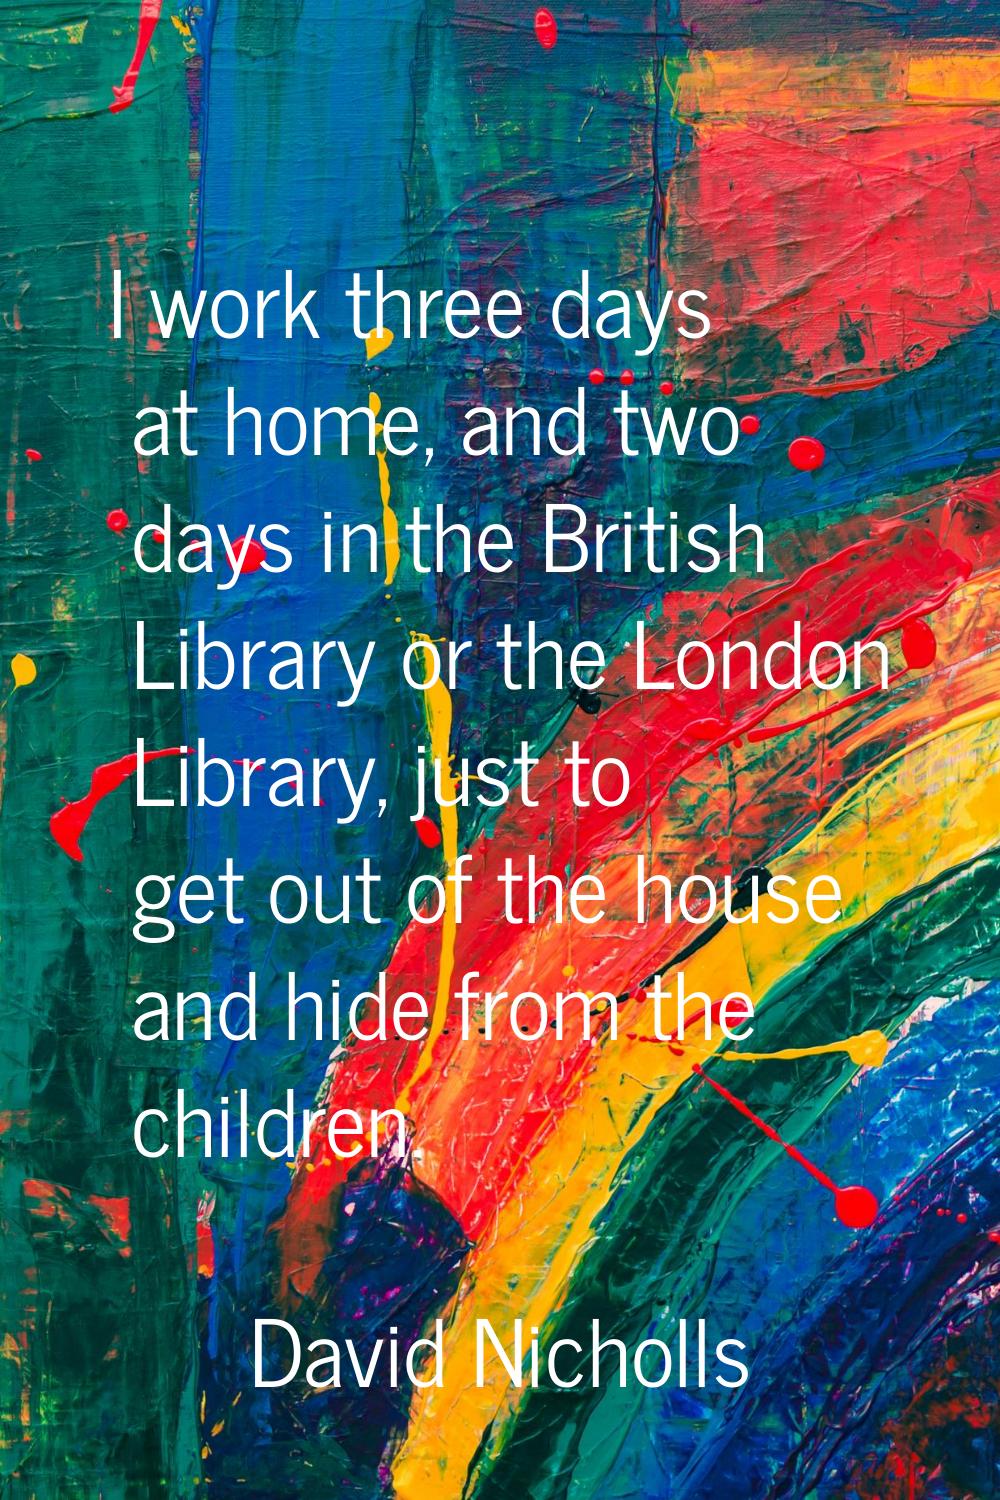 I work three days at home, and two days in the British Library or the London Library, just to get o